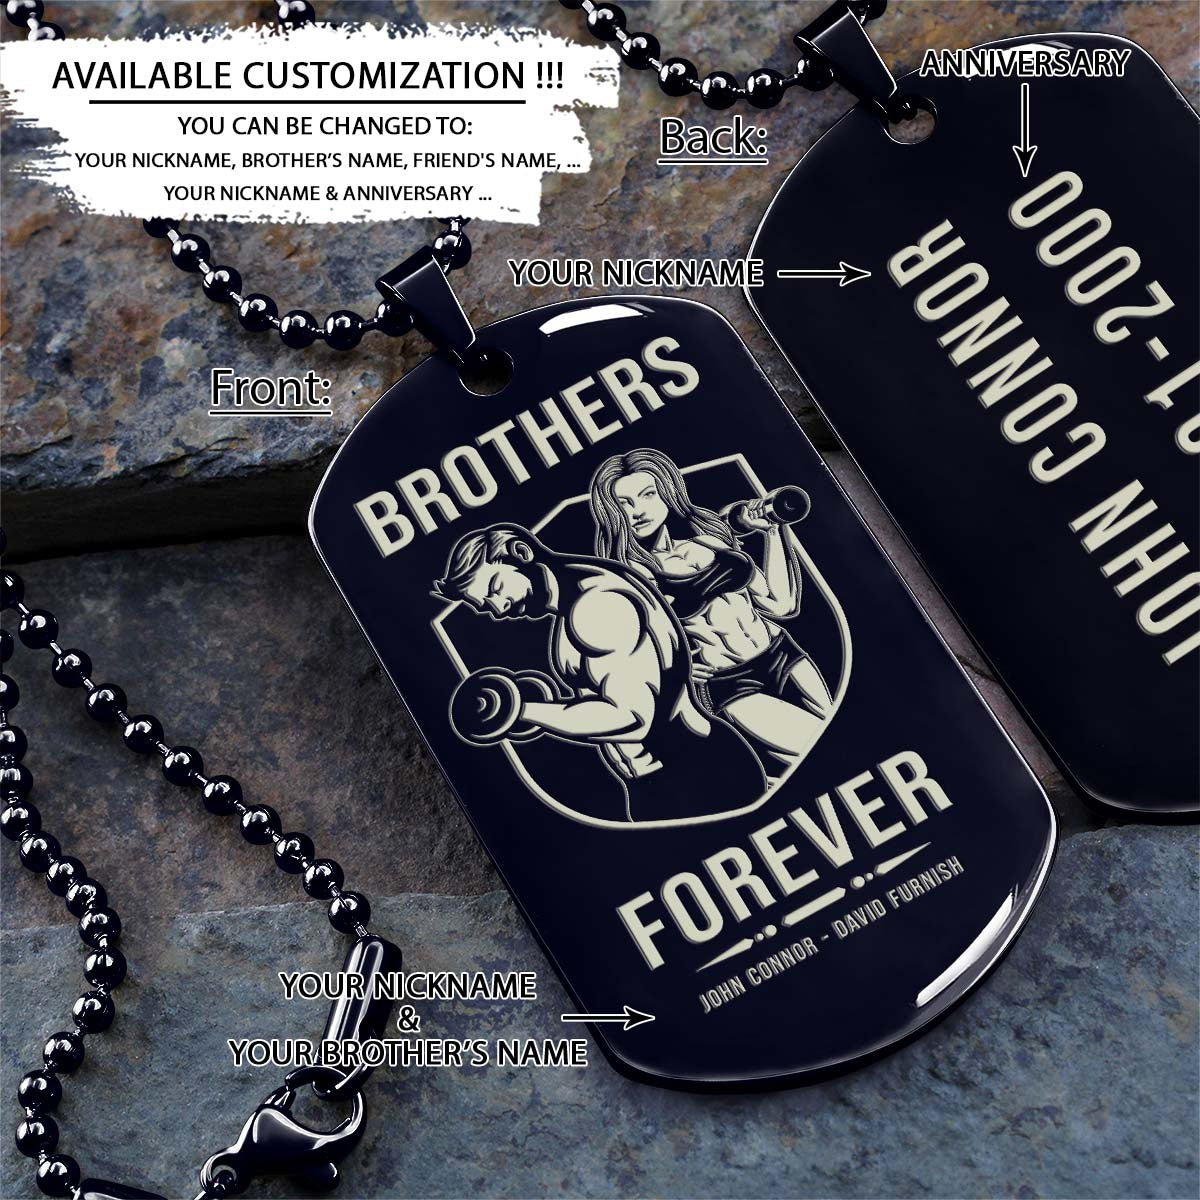 GYMD004 - Brothers Forever - Gym - Fitness Center - Workout - Gym Dog Tag - Gym Necklace - Black Engrave Dog Tag